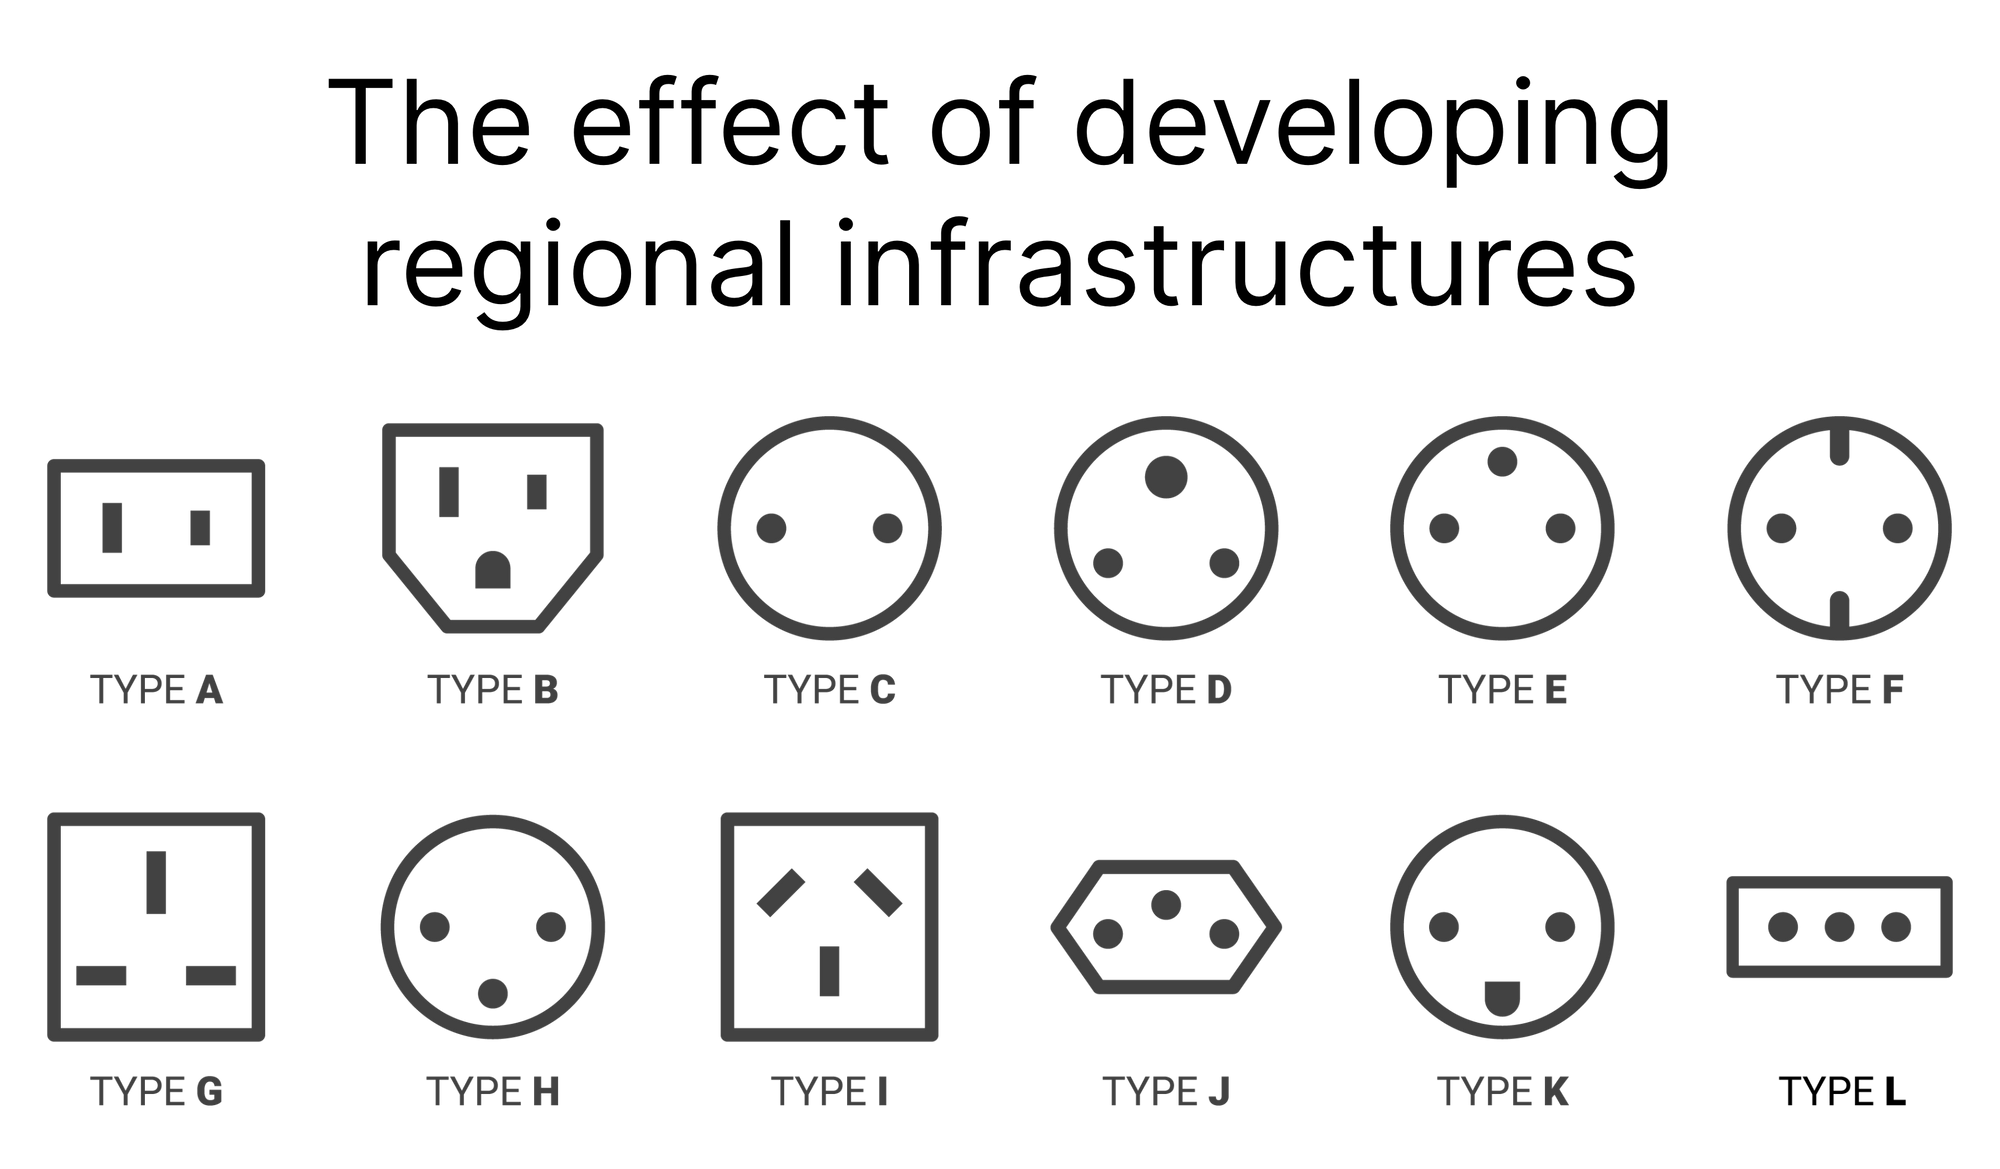 Image of multiple plugs used around the world with caption "The effect of developing regional infrastructures"